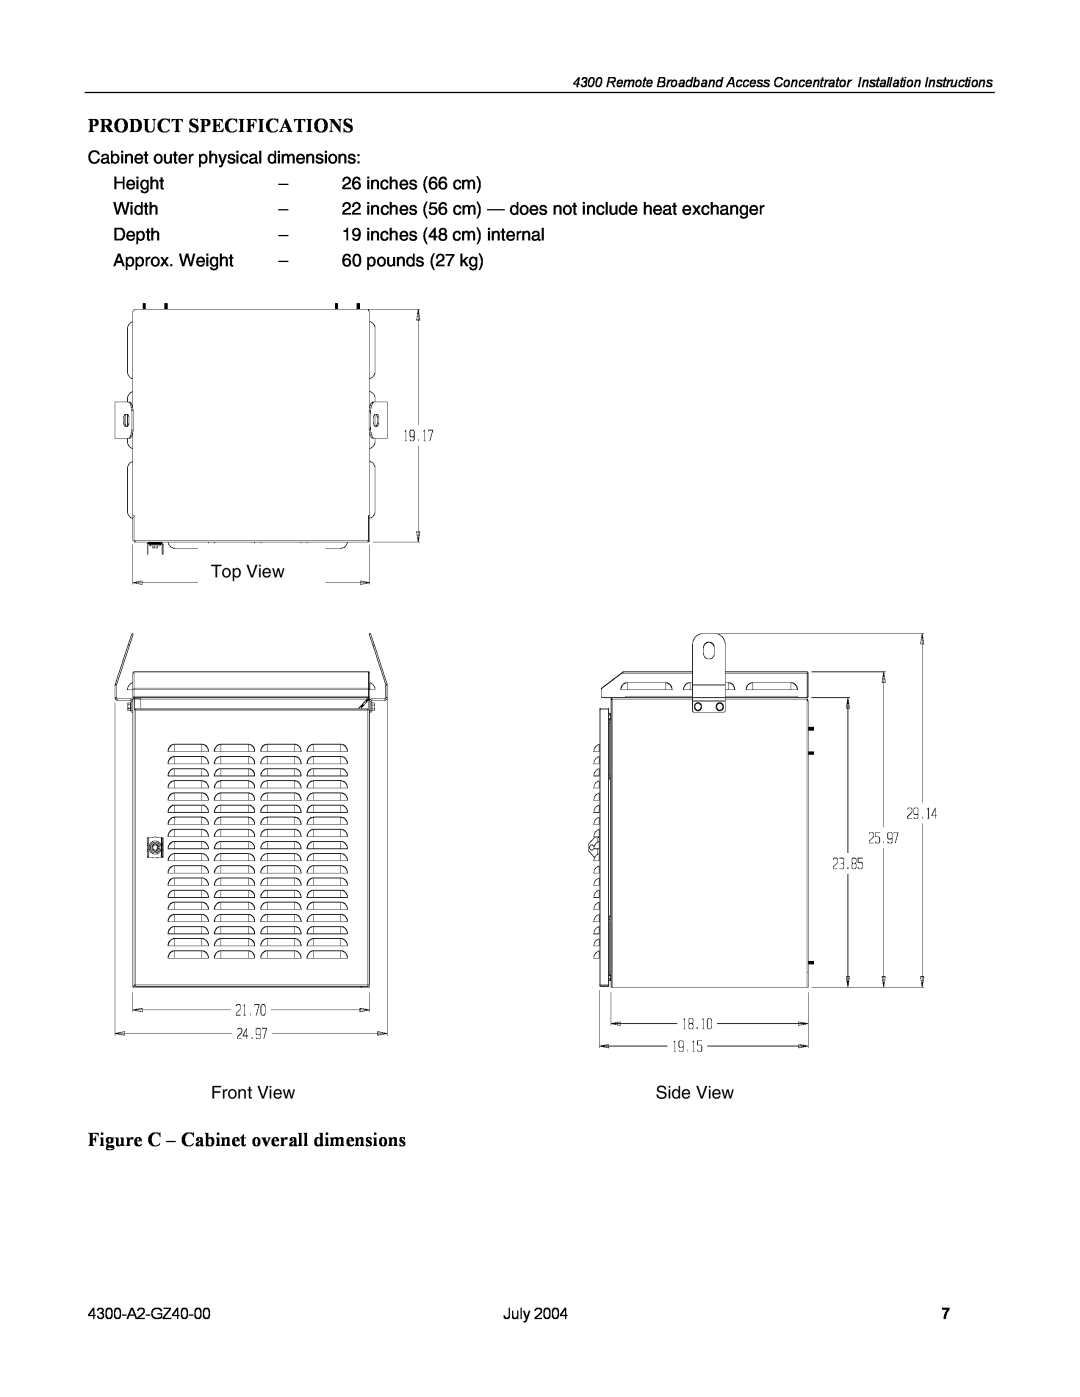 Paradyne 4300 installation instructions Product Specifications, Figure C - Cabinet overall dimensions 